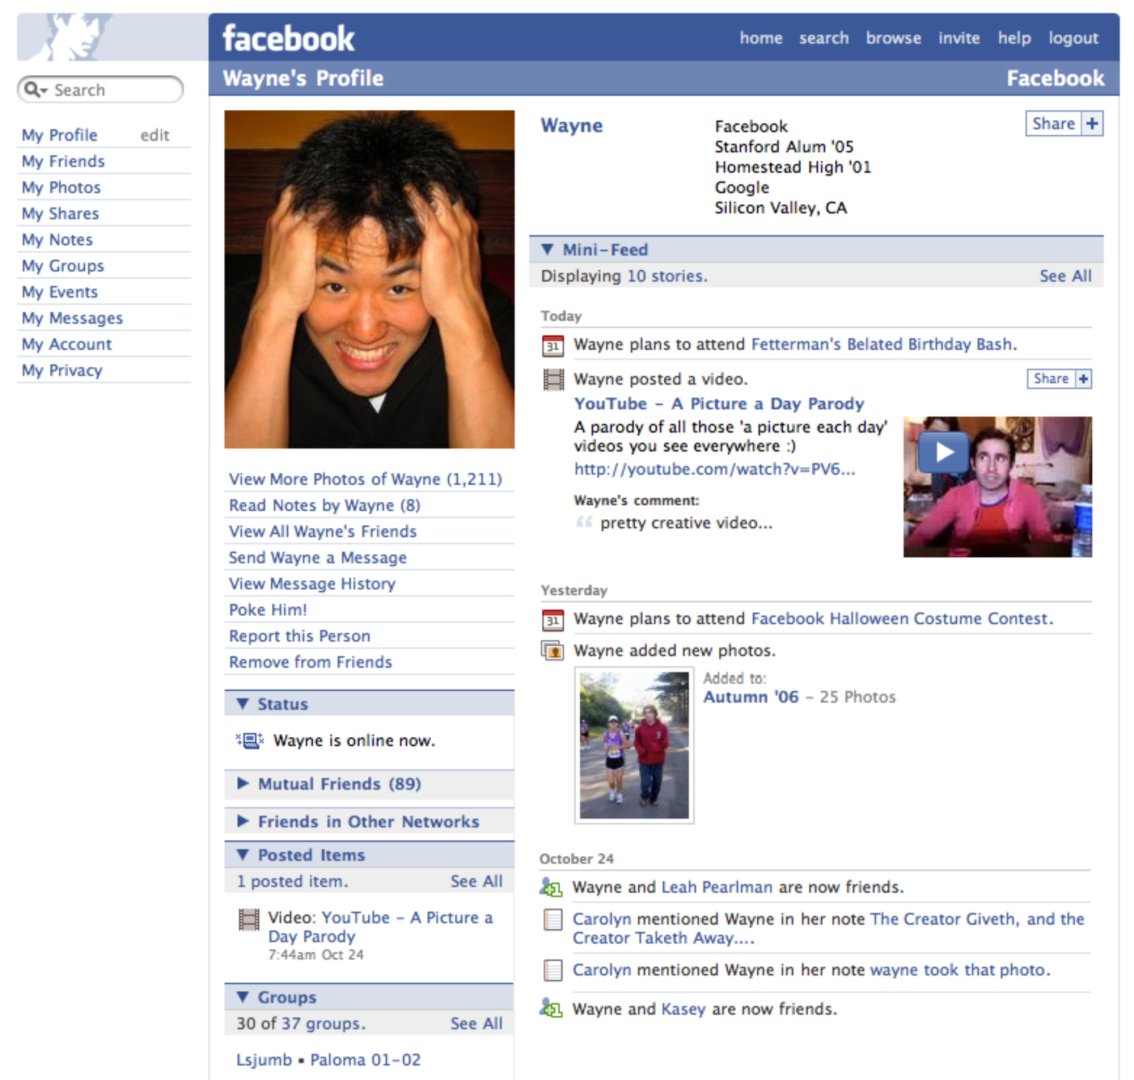 18 Years of Facebook Website Design History - 33 Images - Version Museum